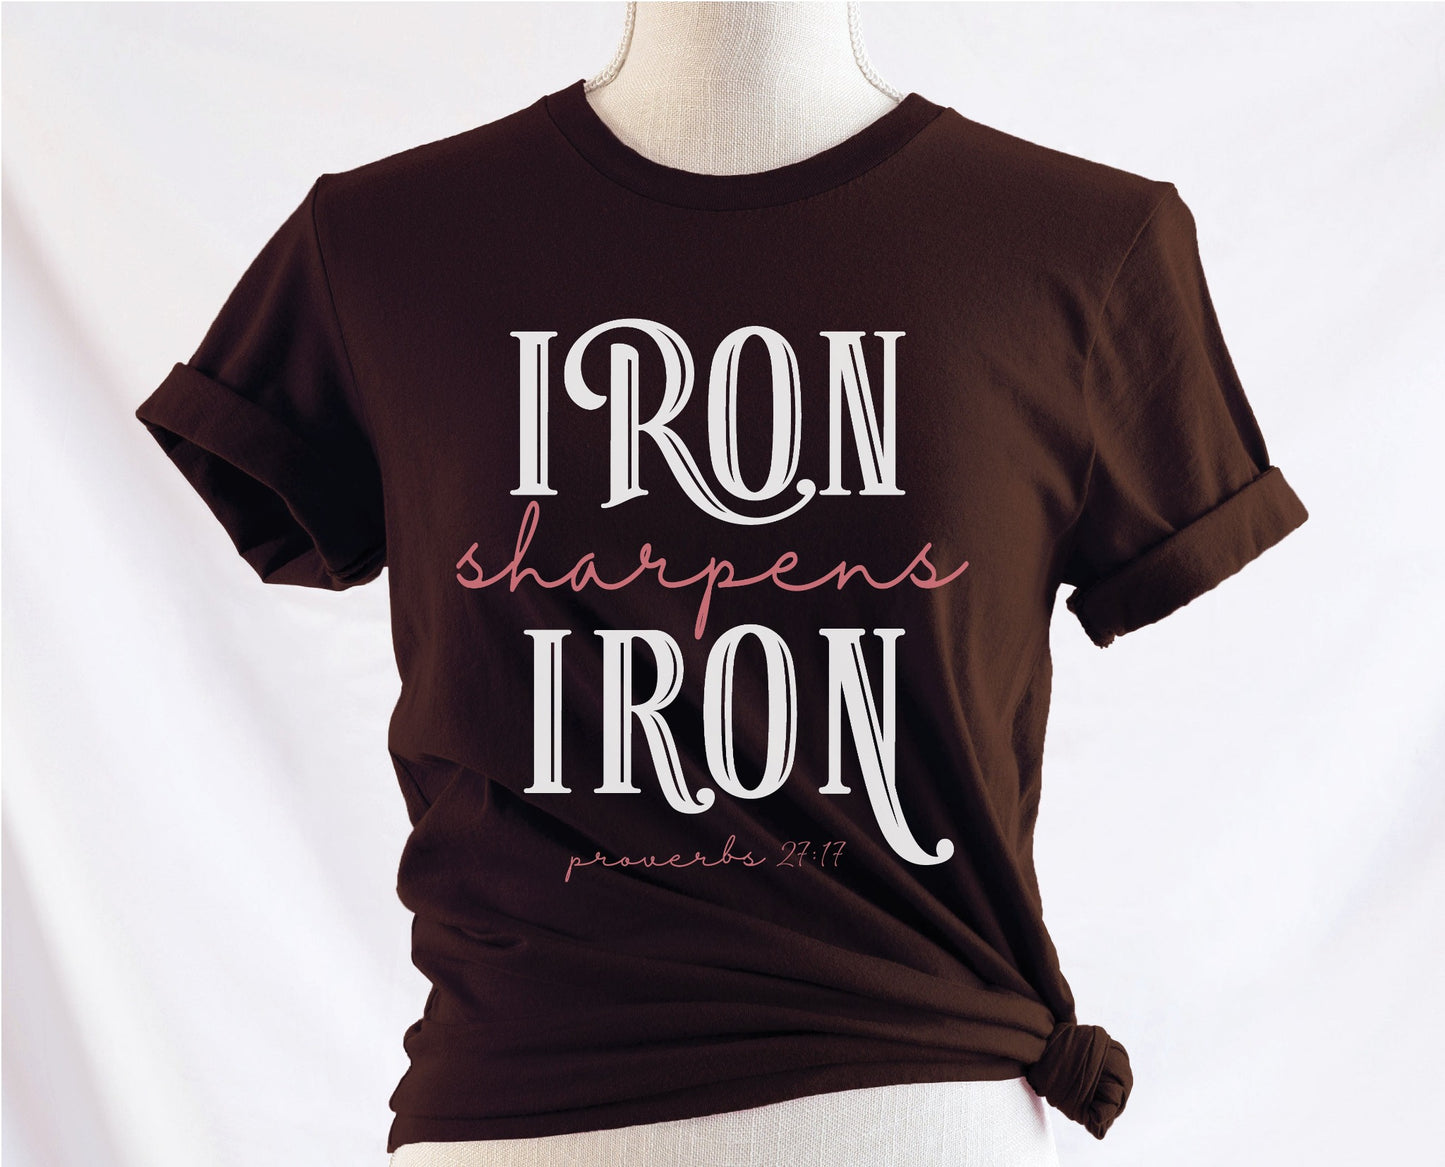 Iron Sharpens Iron Proverbs 27:17 Christian aesthetic design printed in white and mauve on ladies soft brown unisex t-shirt for women's groups